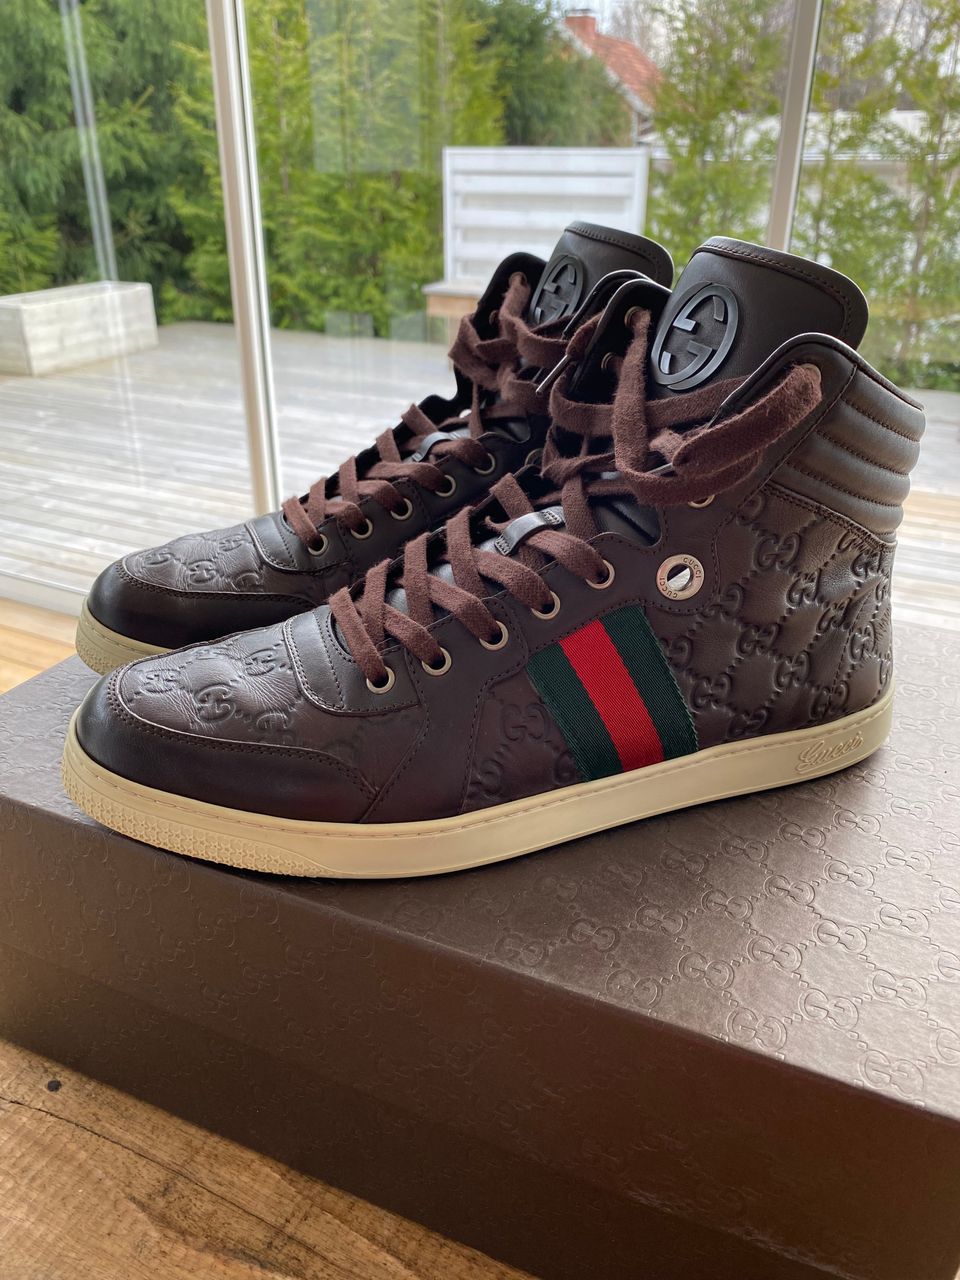 Gucci high top sneaker size 10